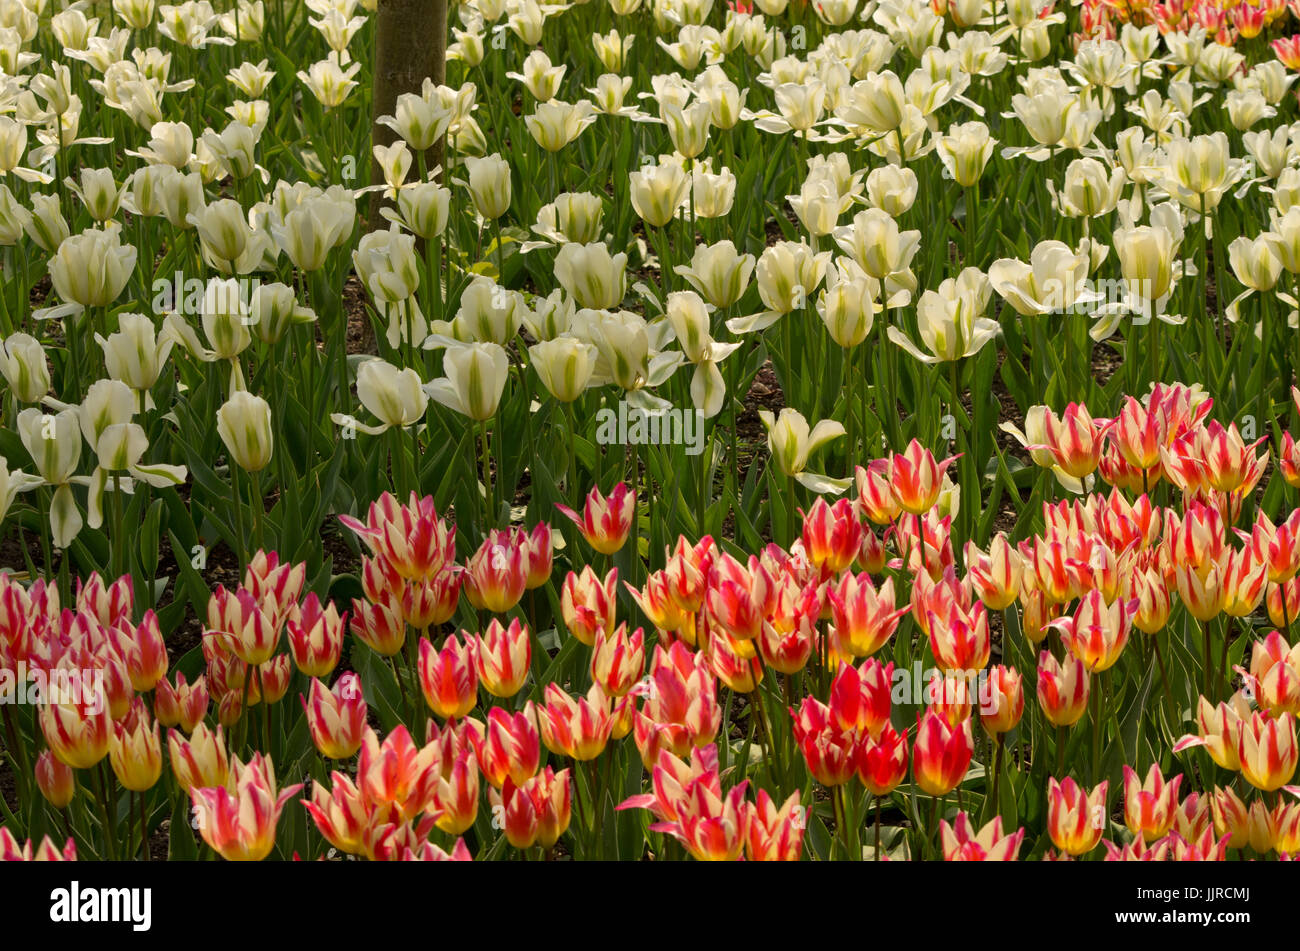 Tulips Spring Green and Tricolette Stock Photo